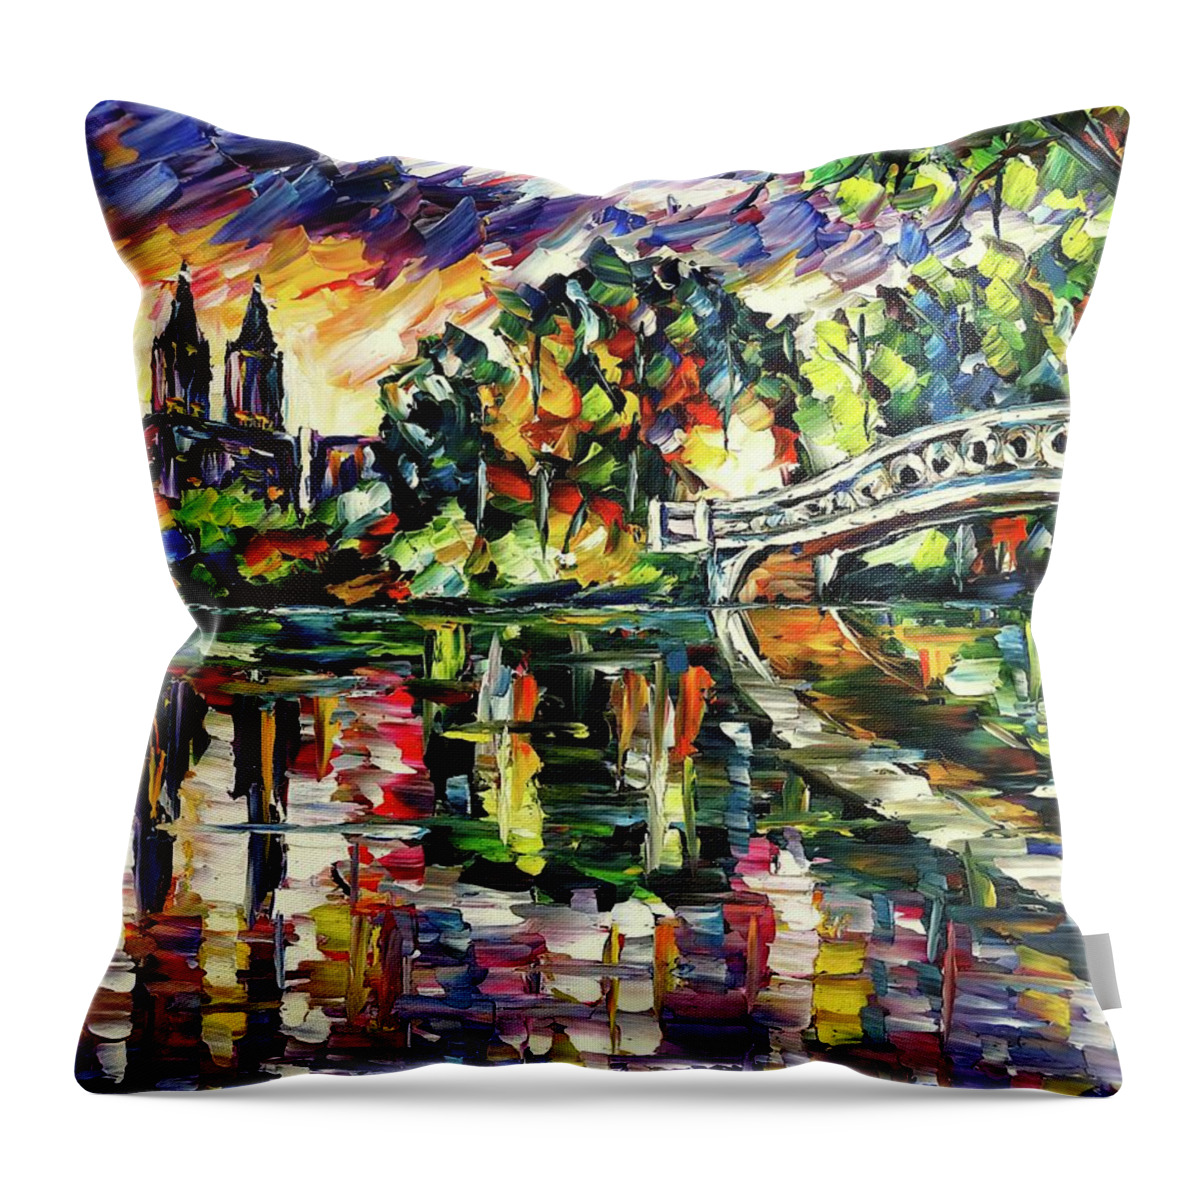 Park In New York Throw Pillow featuring the painting Central Park In The Evening Light by Mirek Kuzniar